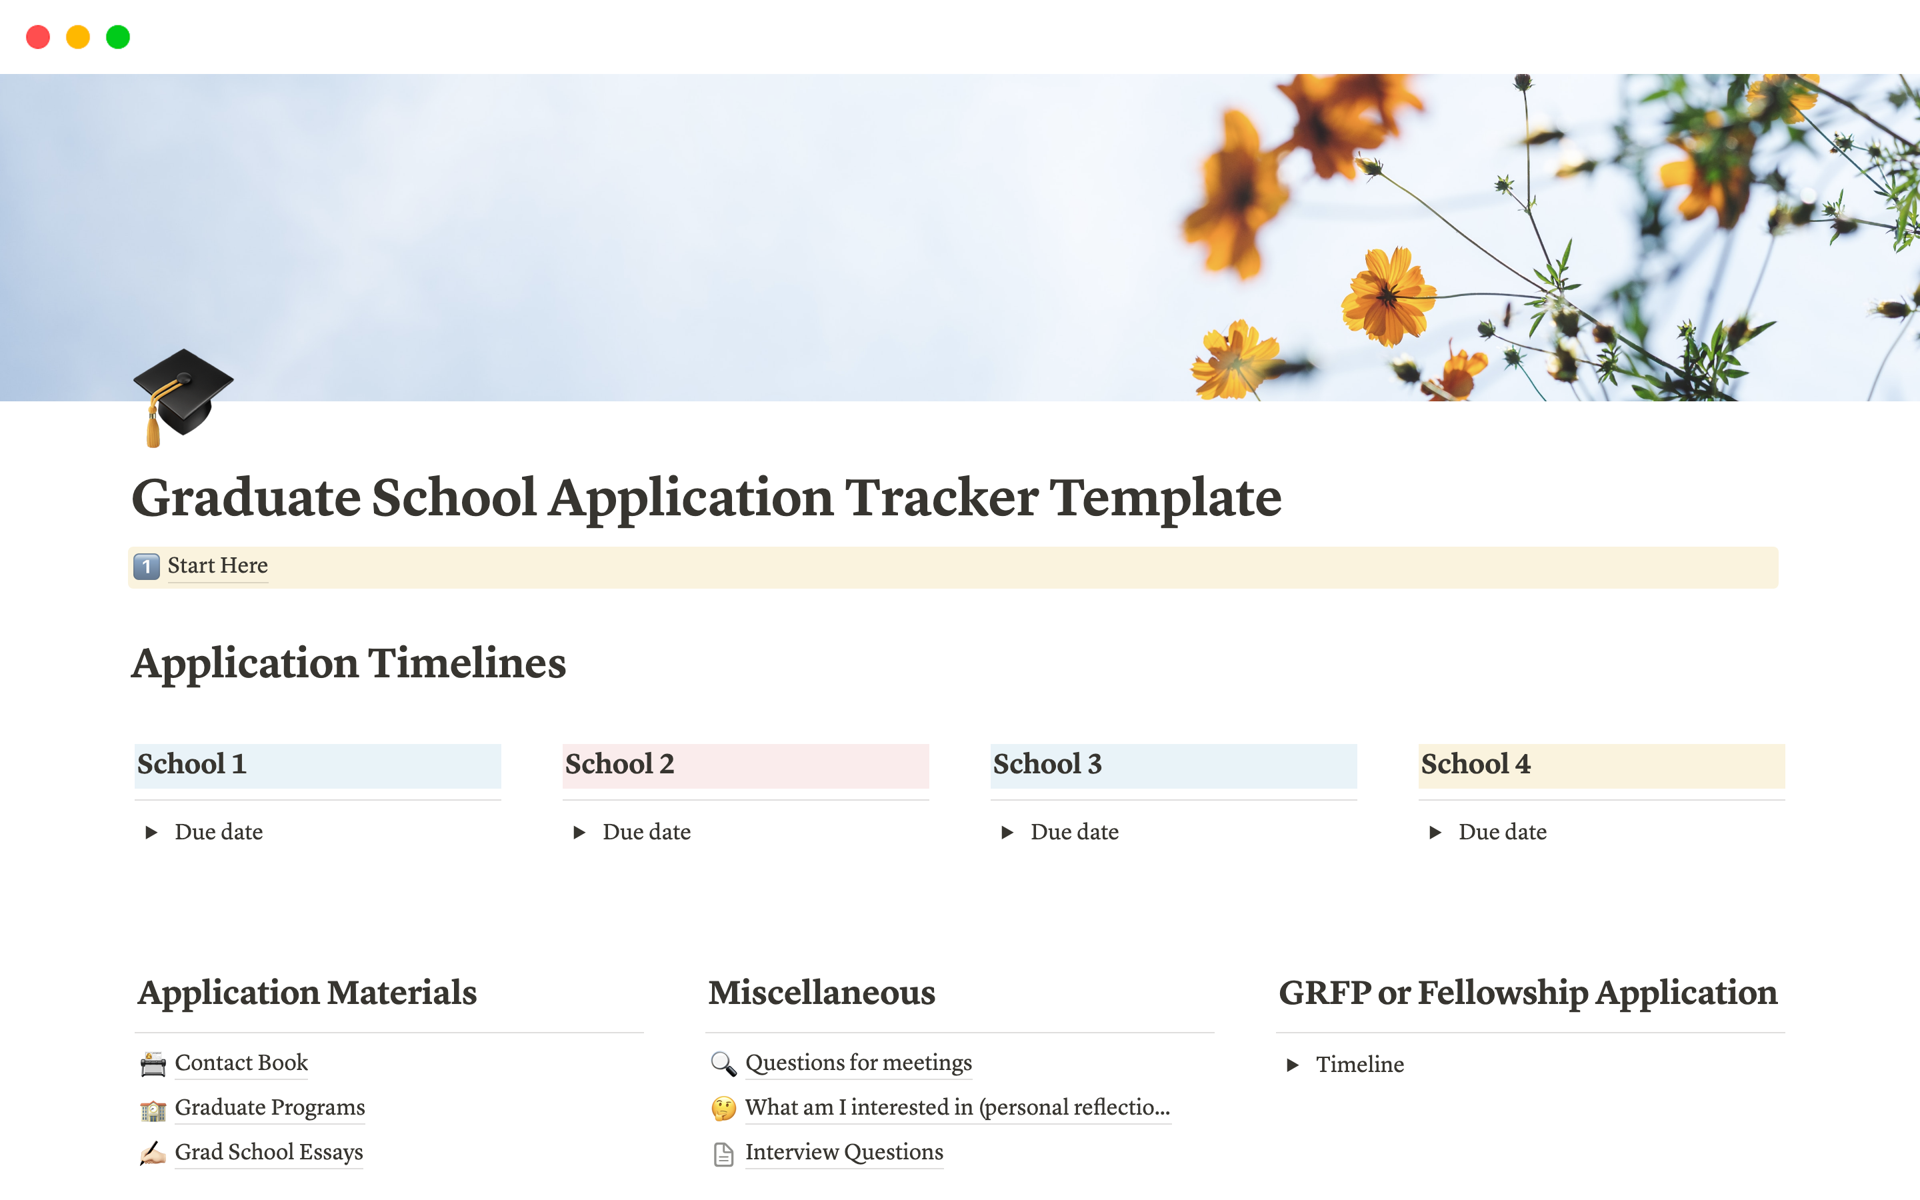 A template preview for Graduate School Application Tracker